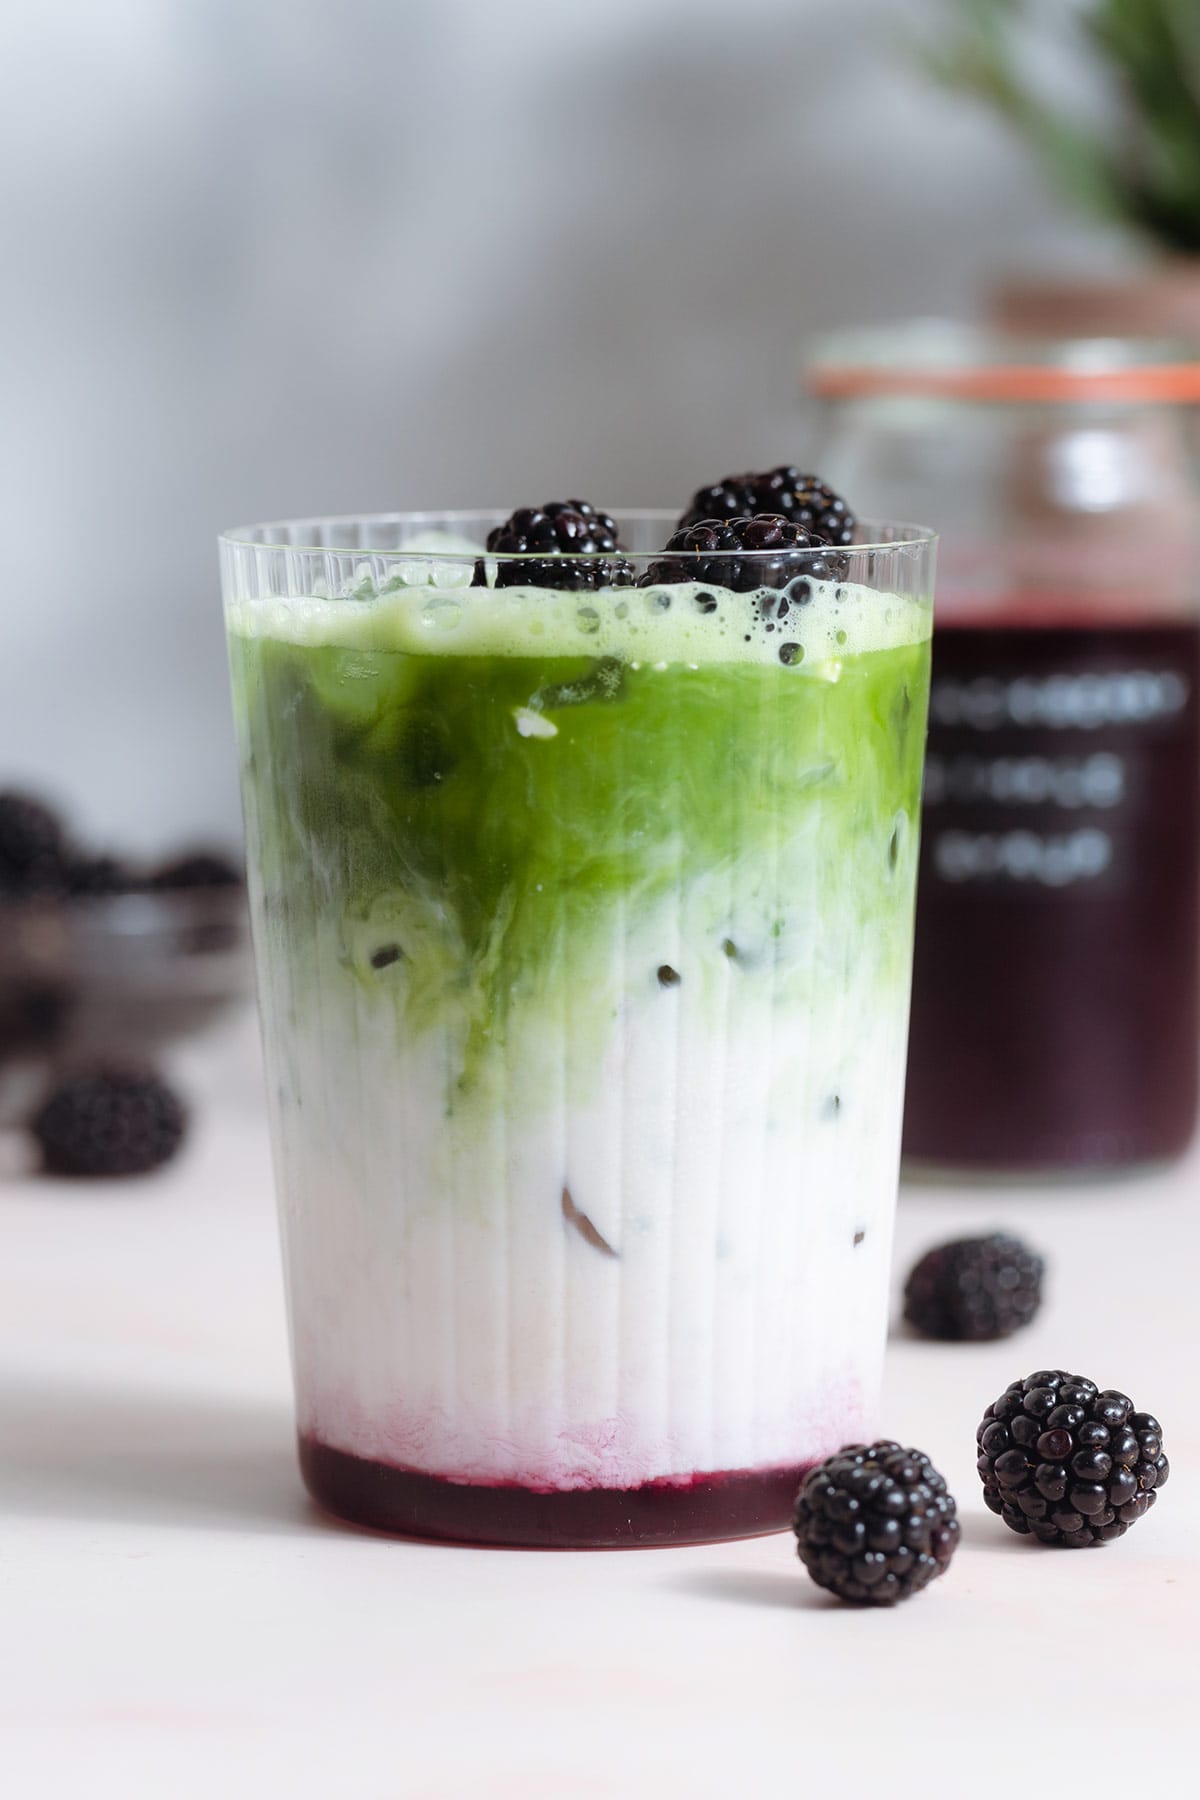 Matcha latte with three layers of matcha, milk, and blackberry syrup in a tall glass garnished with blackberries.